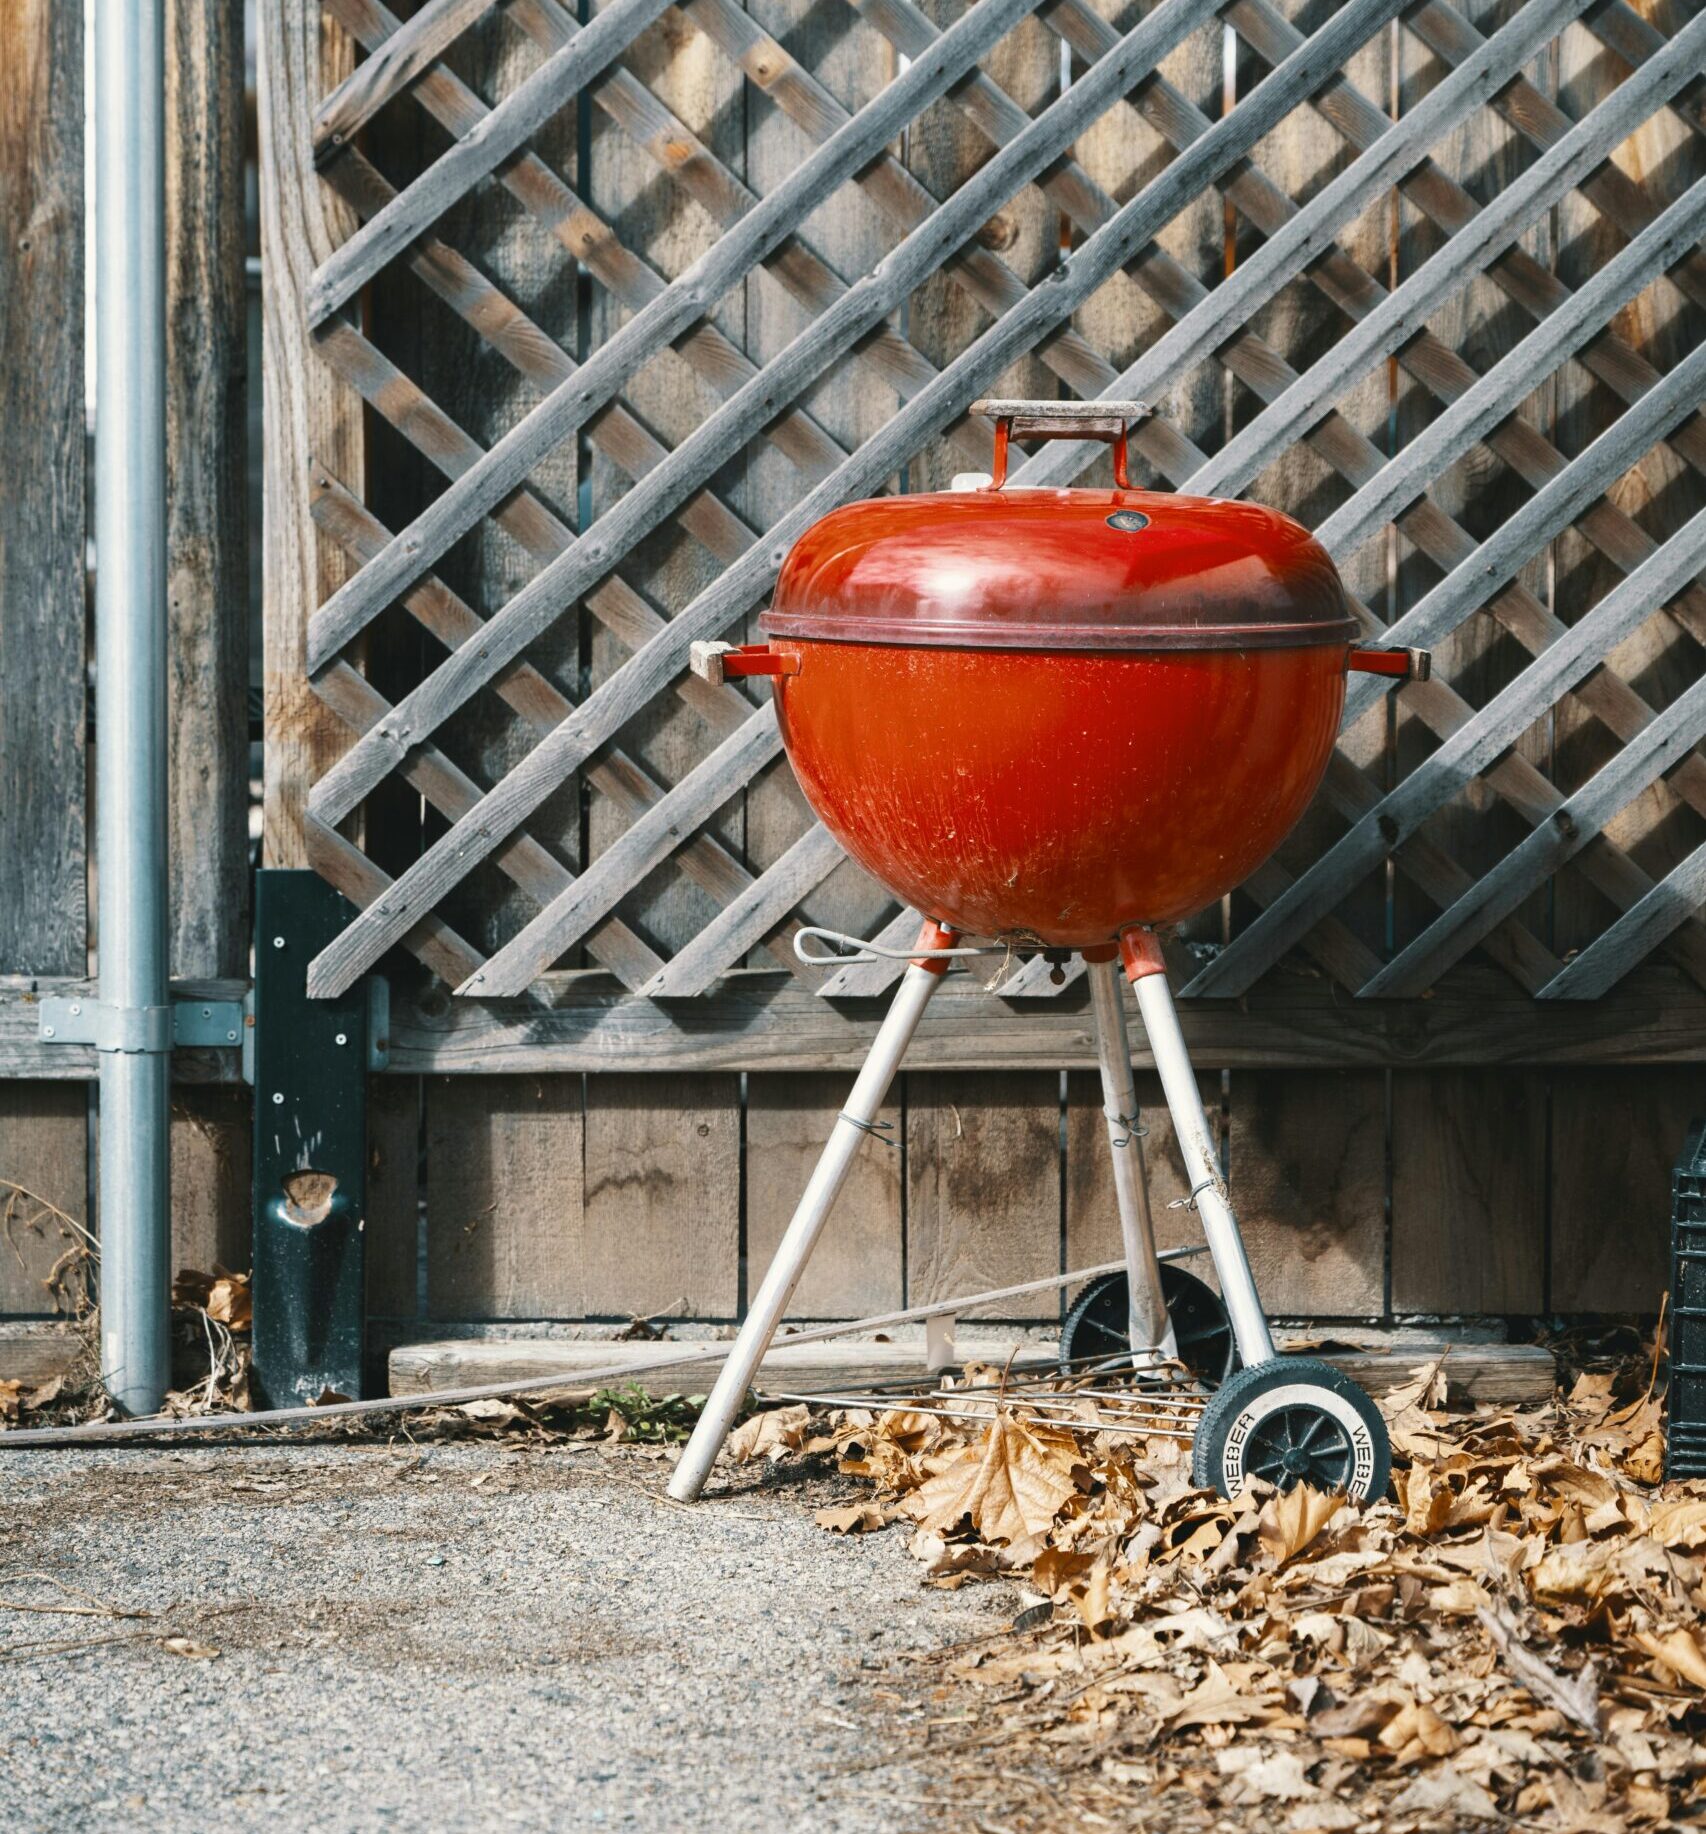 Grilling & Outdoor Living, Sports & Recreation